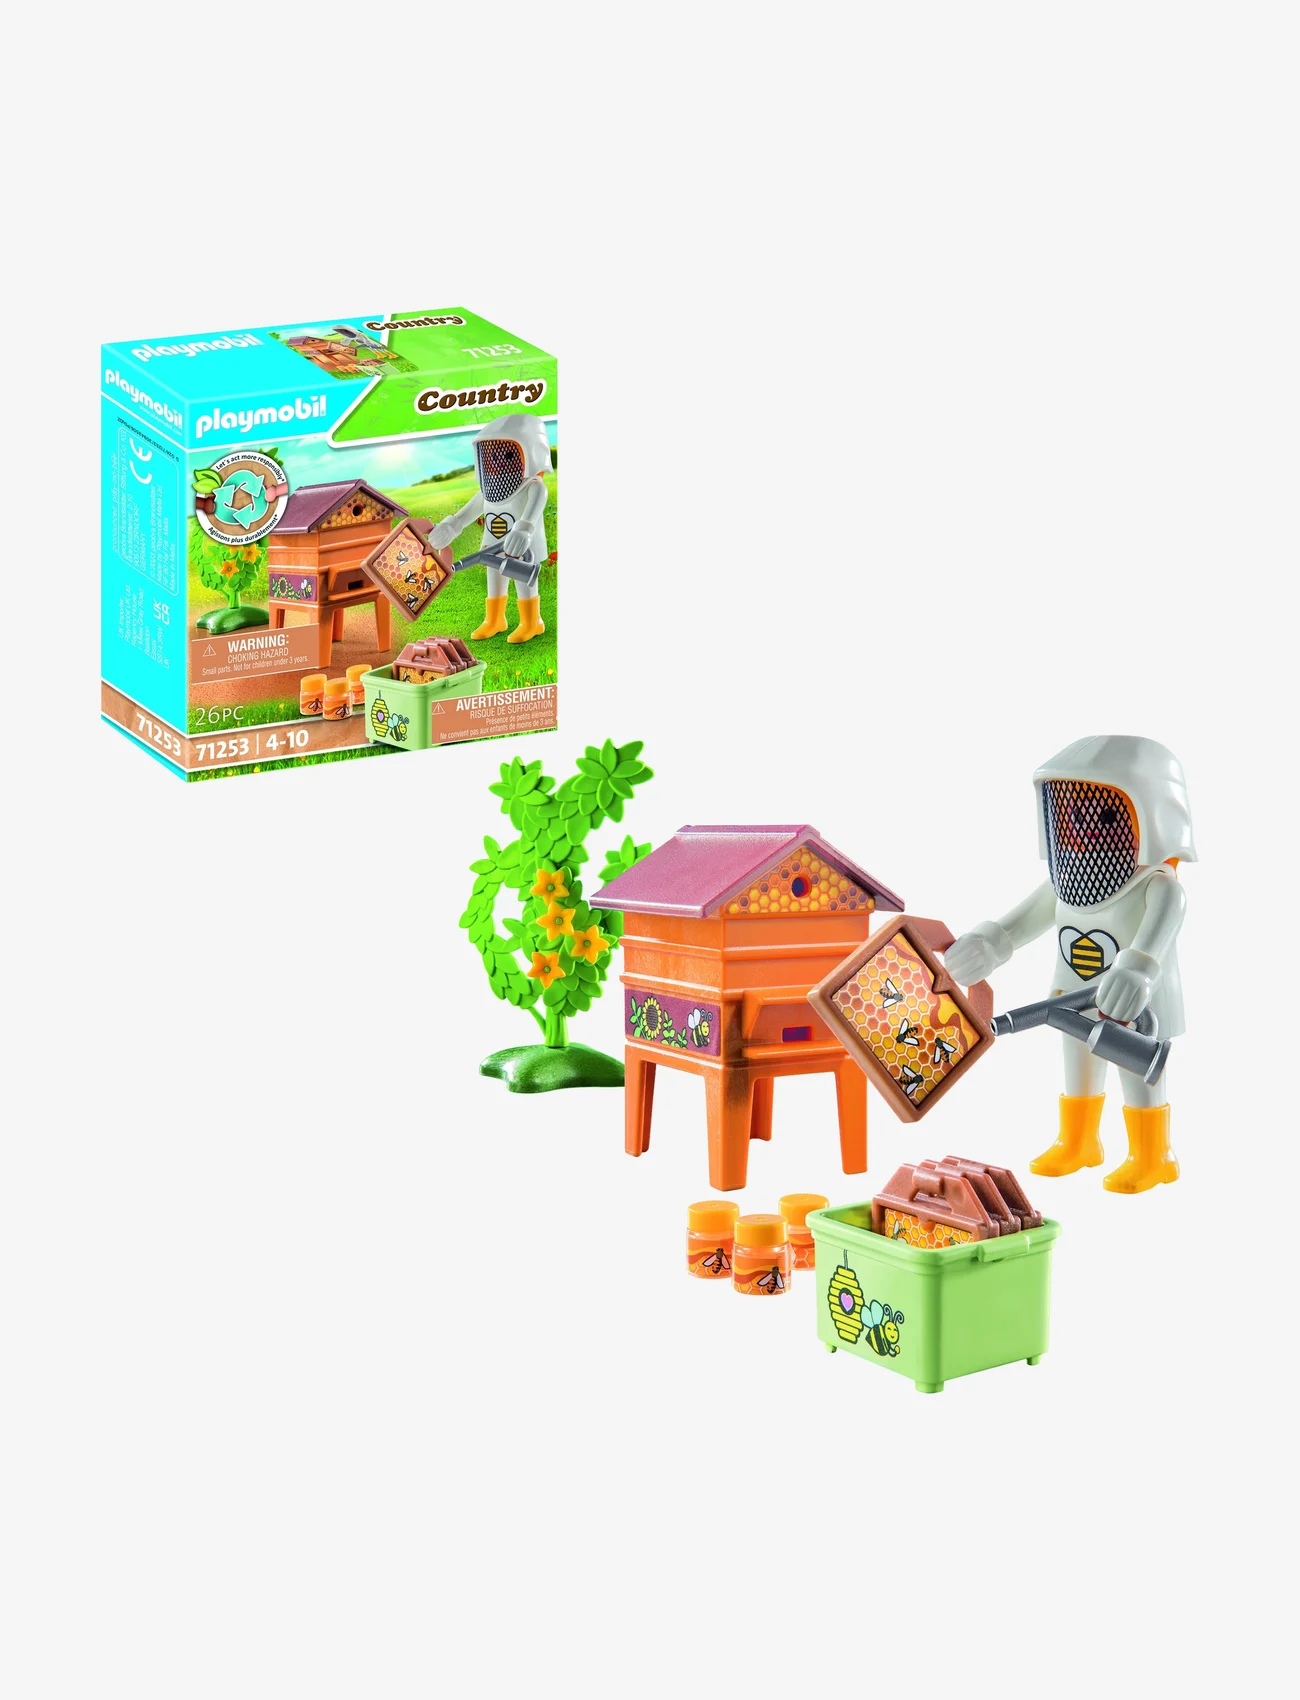 PLAYMOBIL - PLAYMOBIL Country Beekeeper - 71253 - playmobil country - multicolored - 0